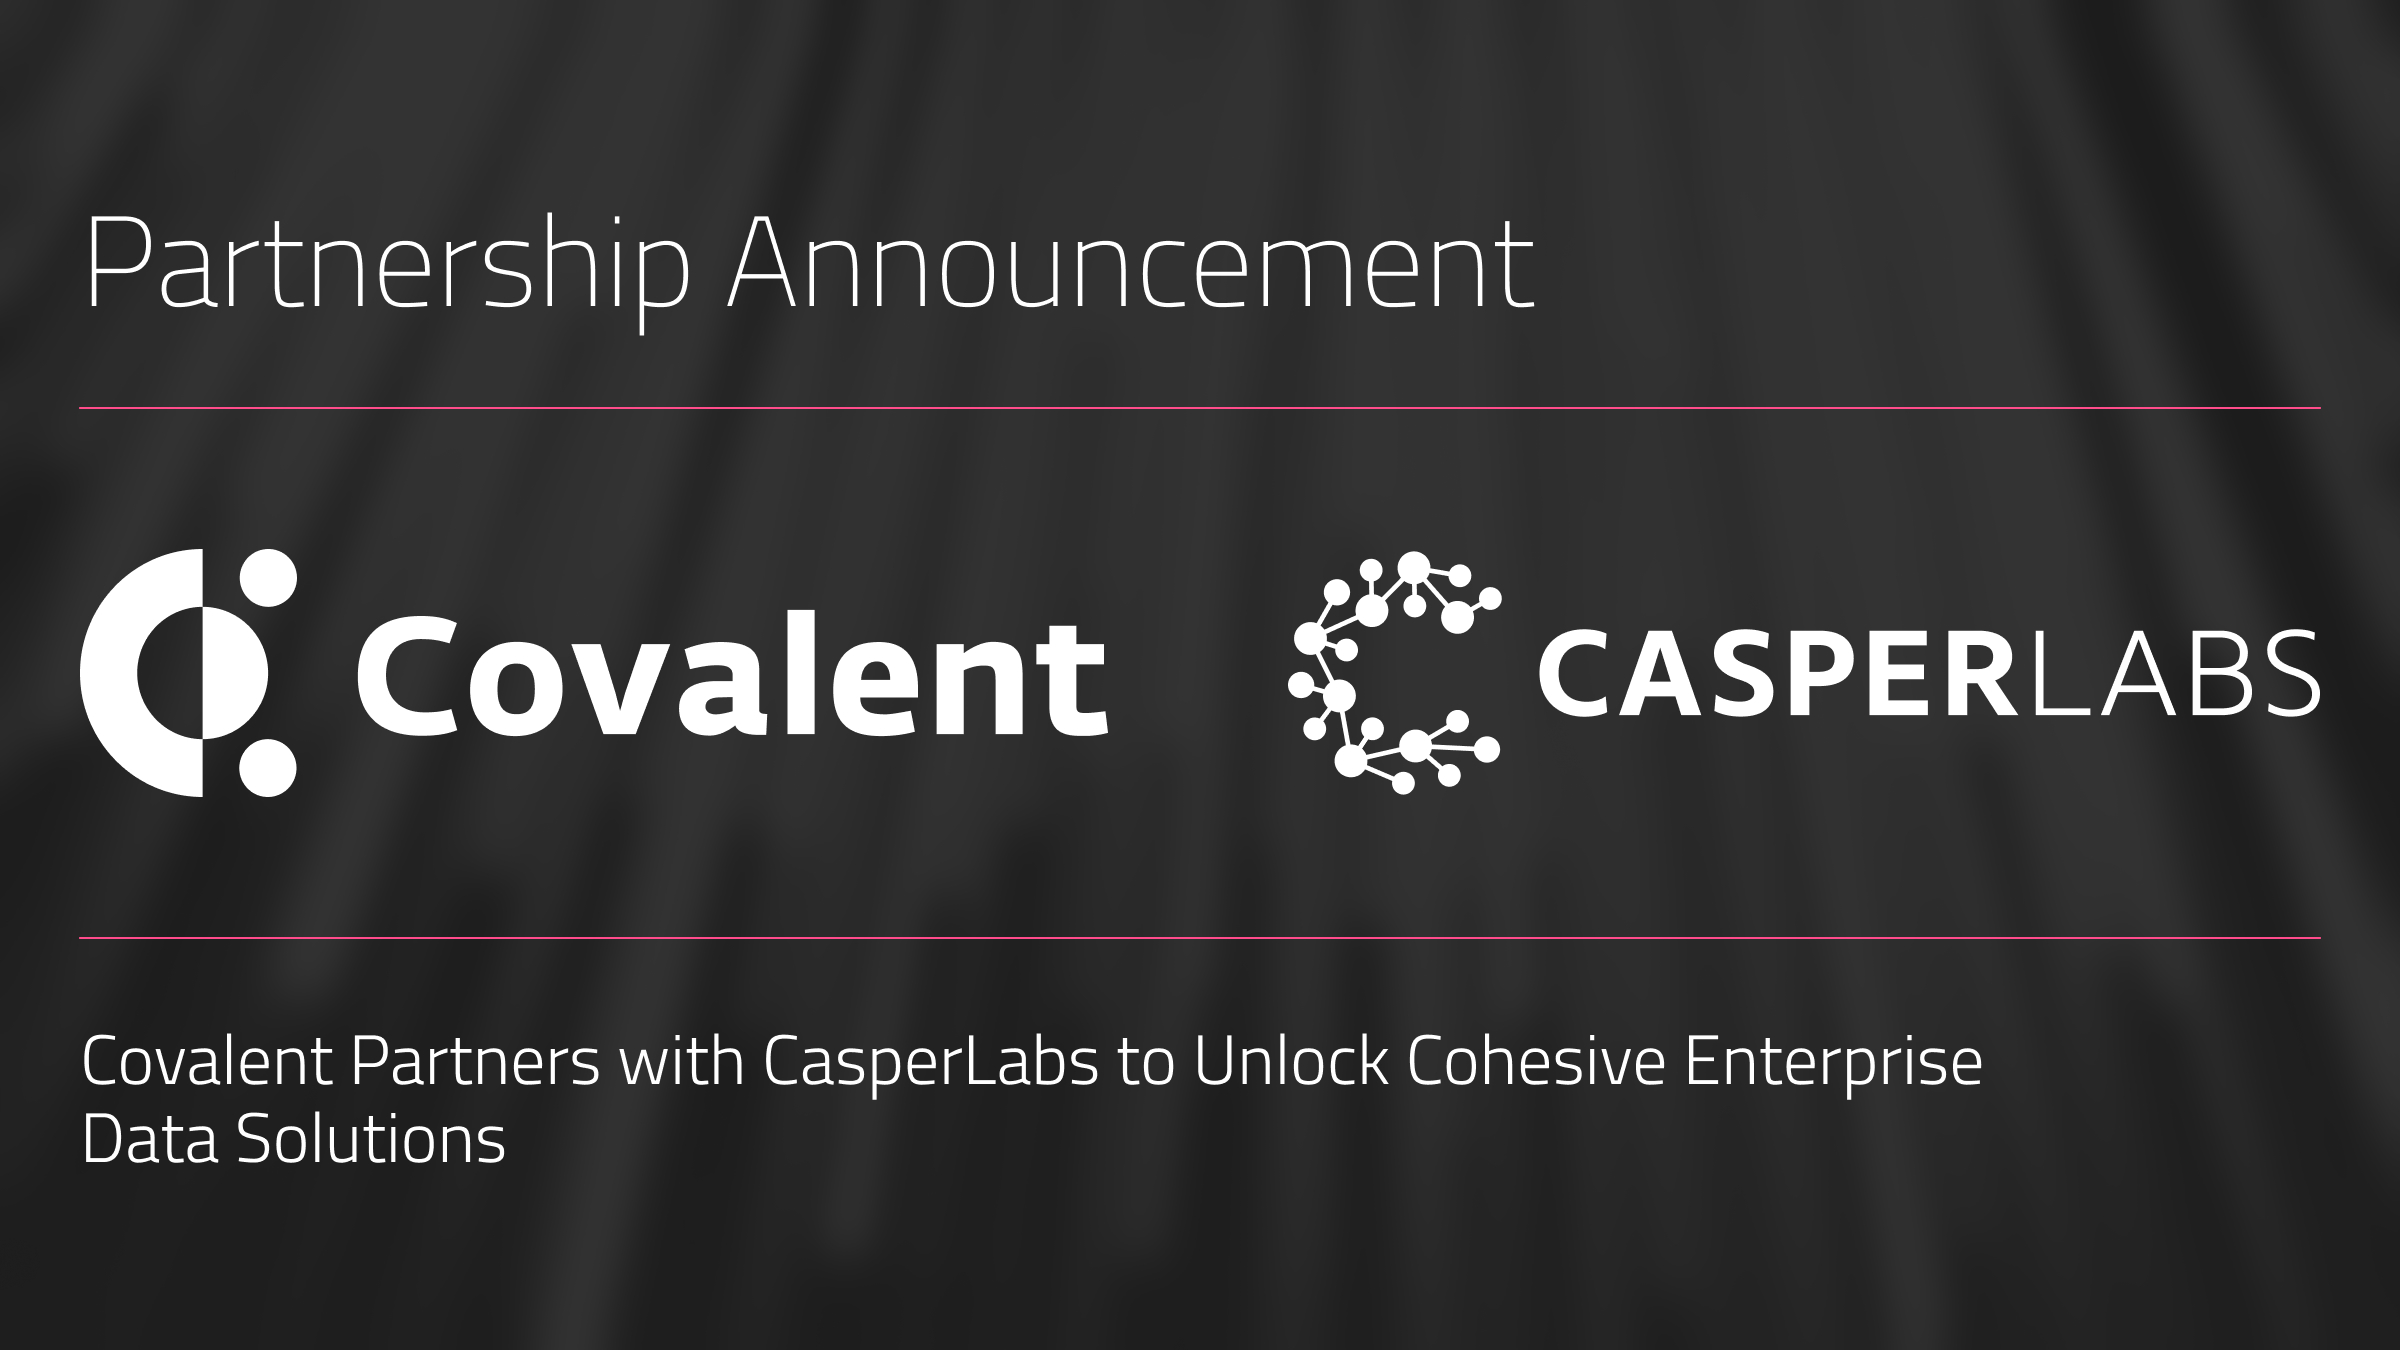 Covalent Partners with CasperLabs to Unlock Cohesive Enterprise Data Solutions